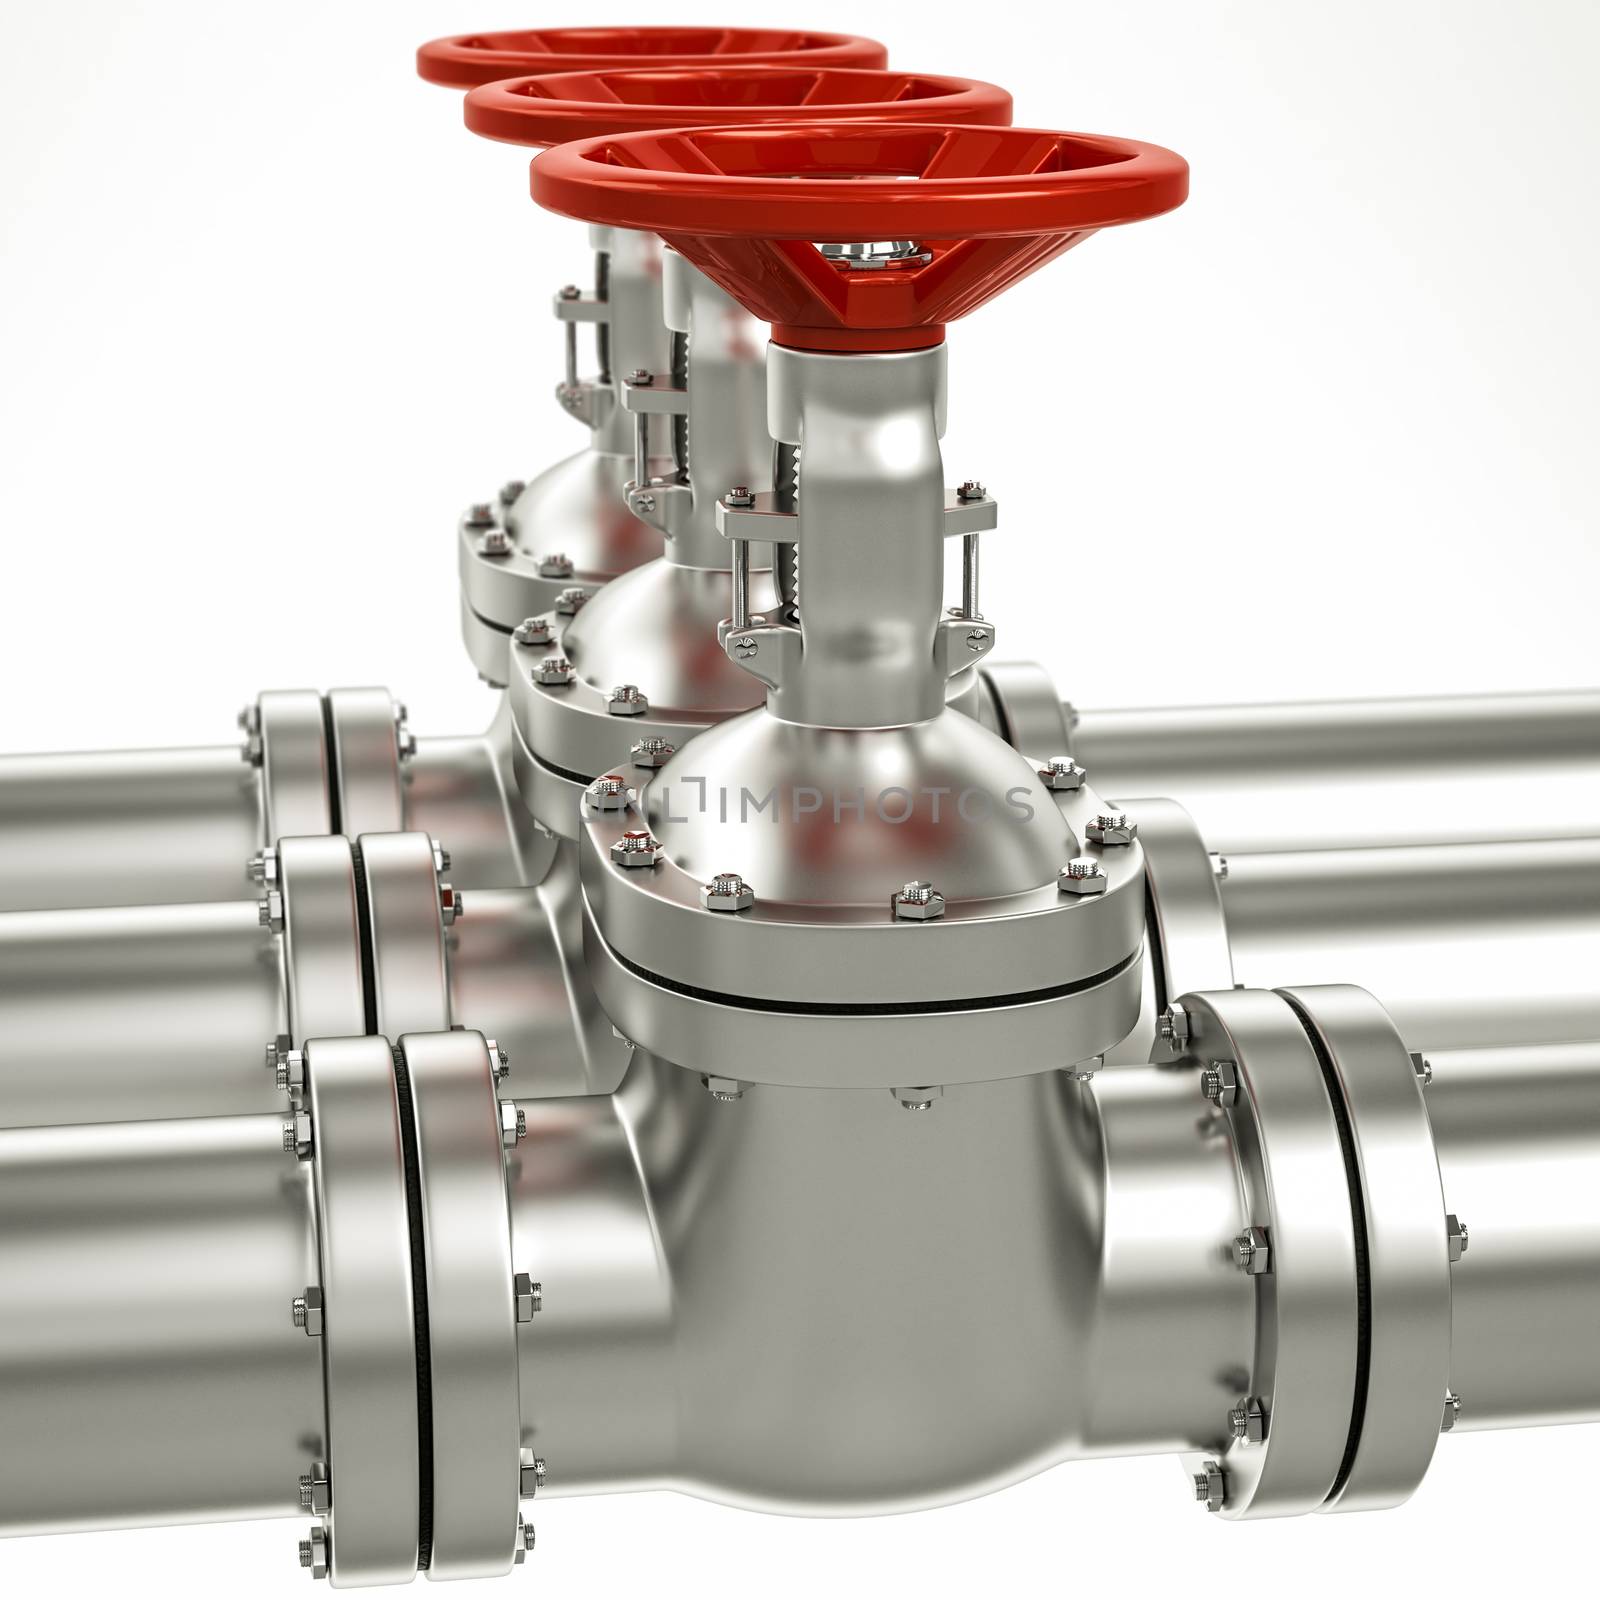 3d metal gas pipe line valves by Lupen